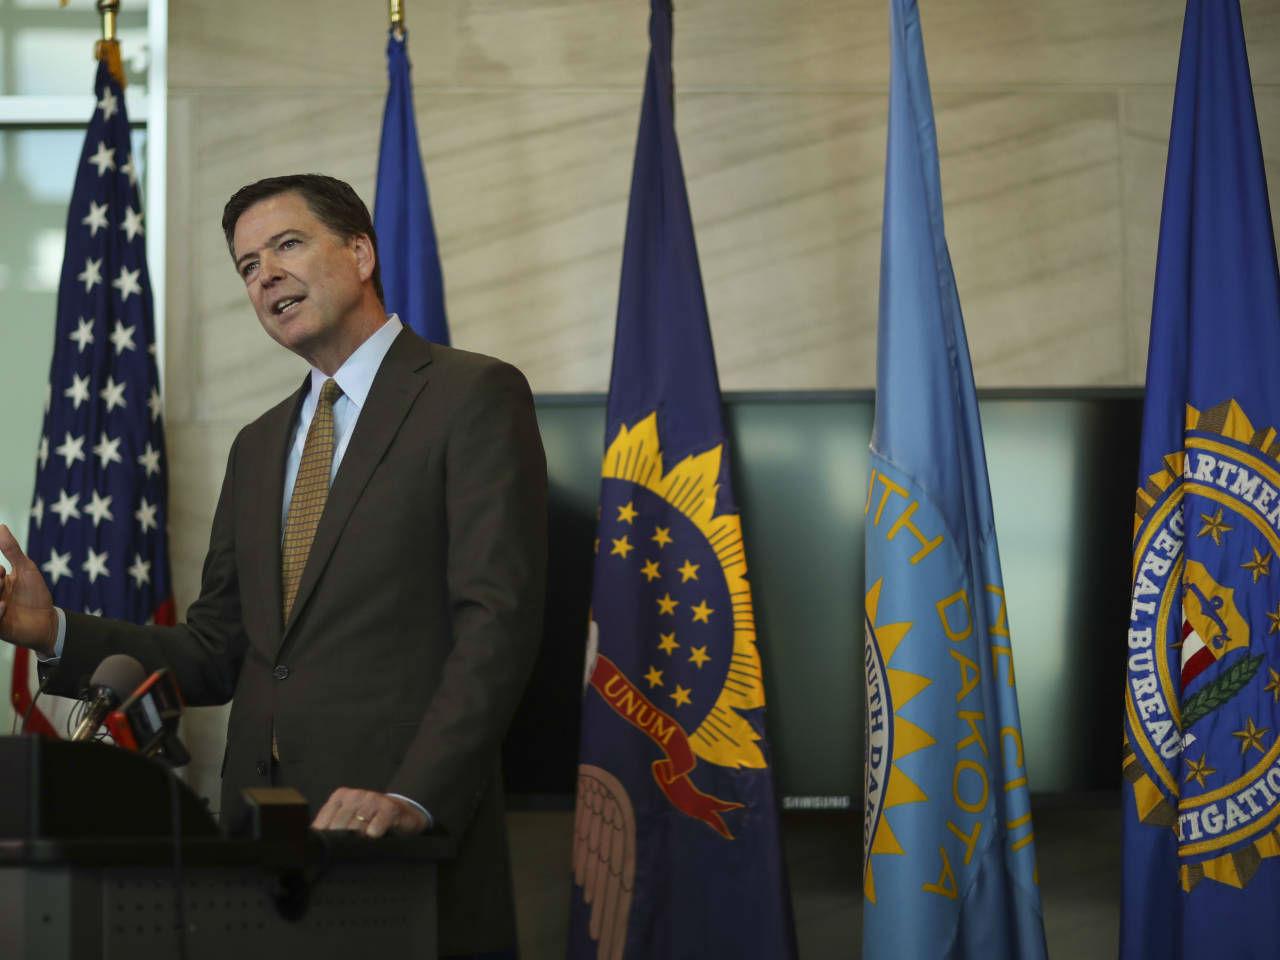 James Comey is the most controversial FBI chief since J Edgar Hoover